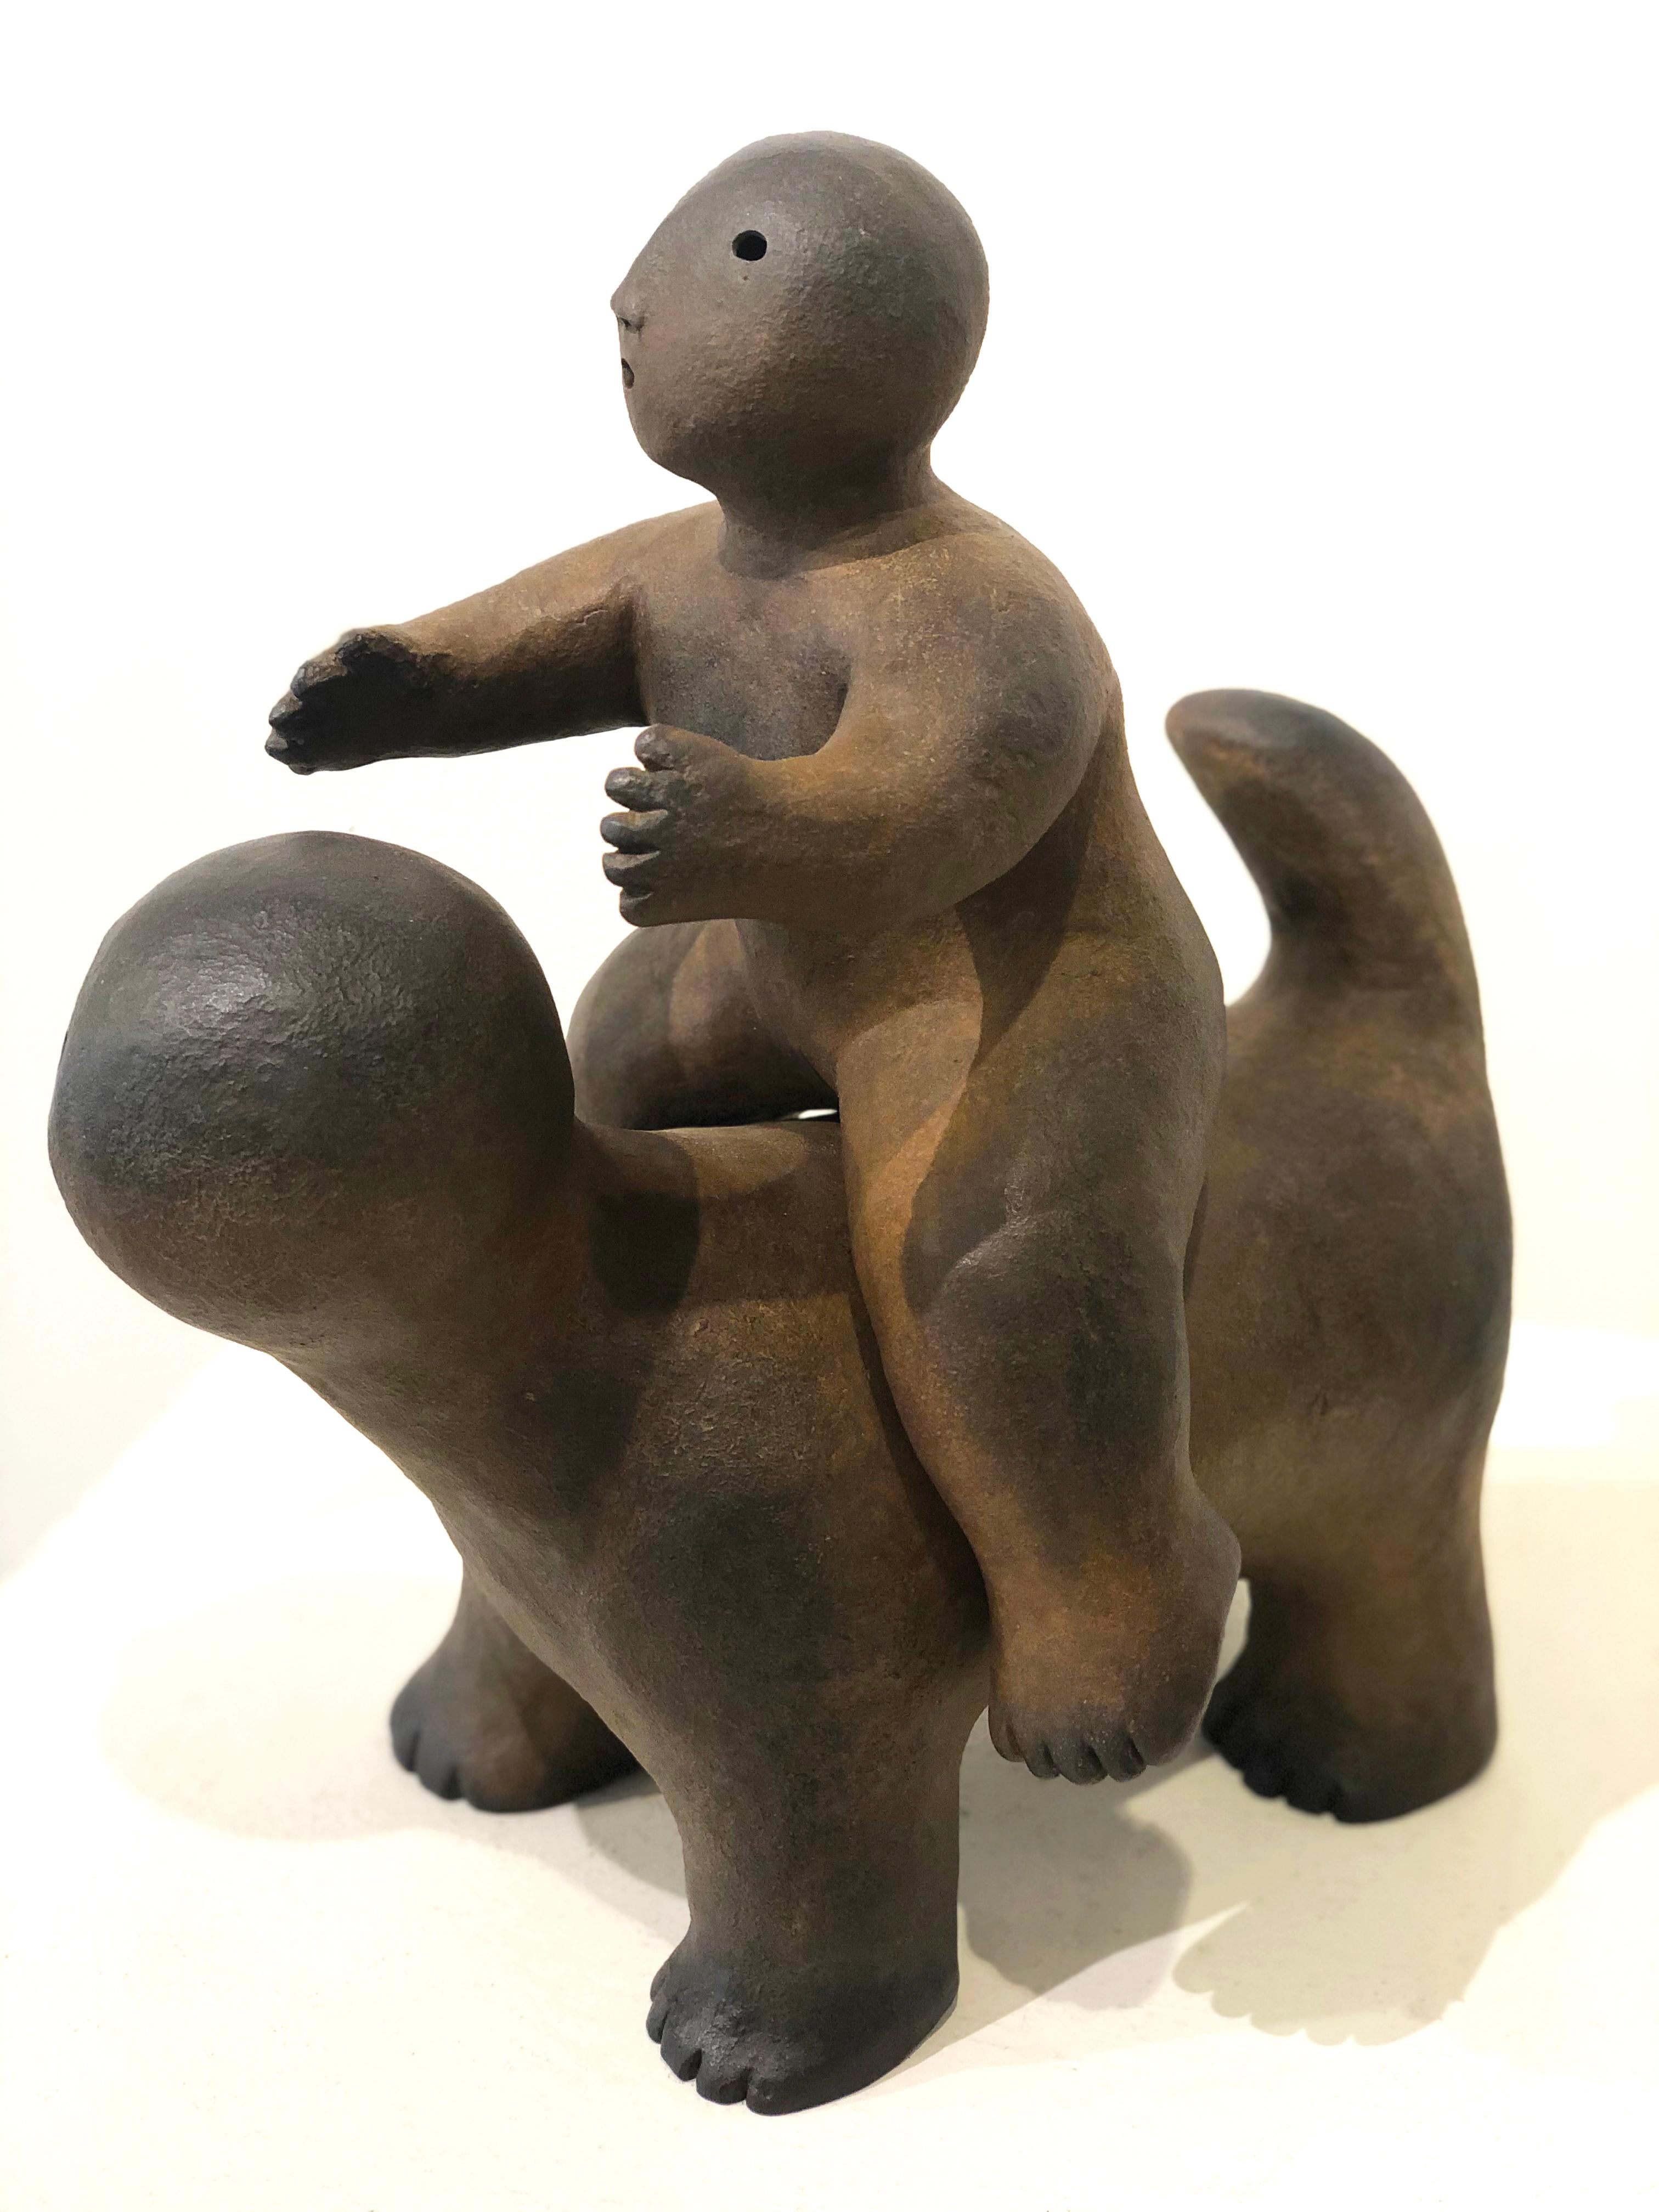 'Animal With Rider' 2019 by Connecticut artist, Joy Brown. Bronze, 13 x 11 x 9.5 in. Influenced by Japanese aesthetics and using their traditional pottery methods, Brown creates child-like, anthropomorphous figurative sculptures in clay and bronze. 